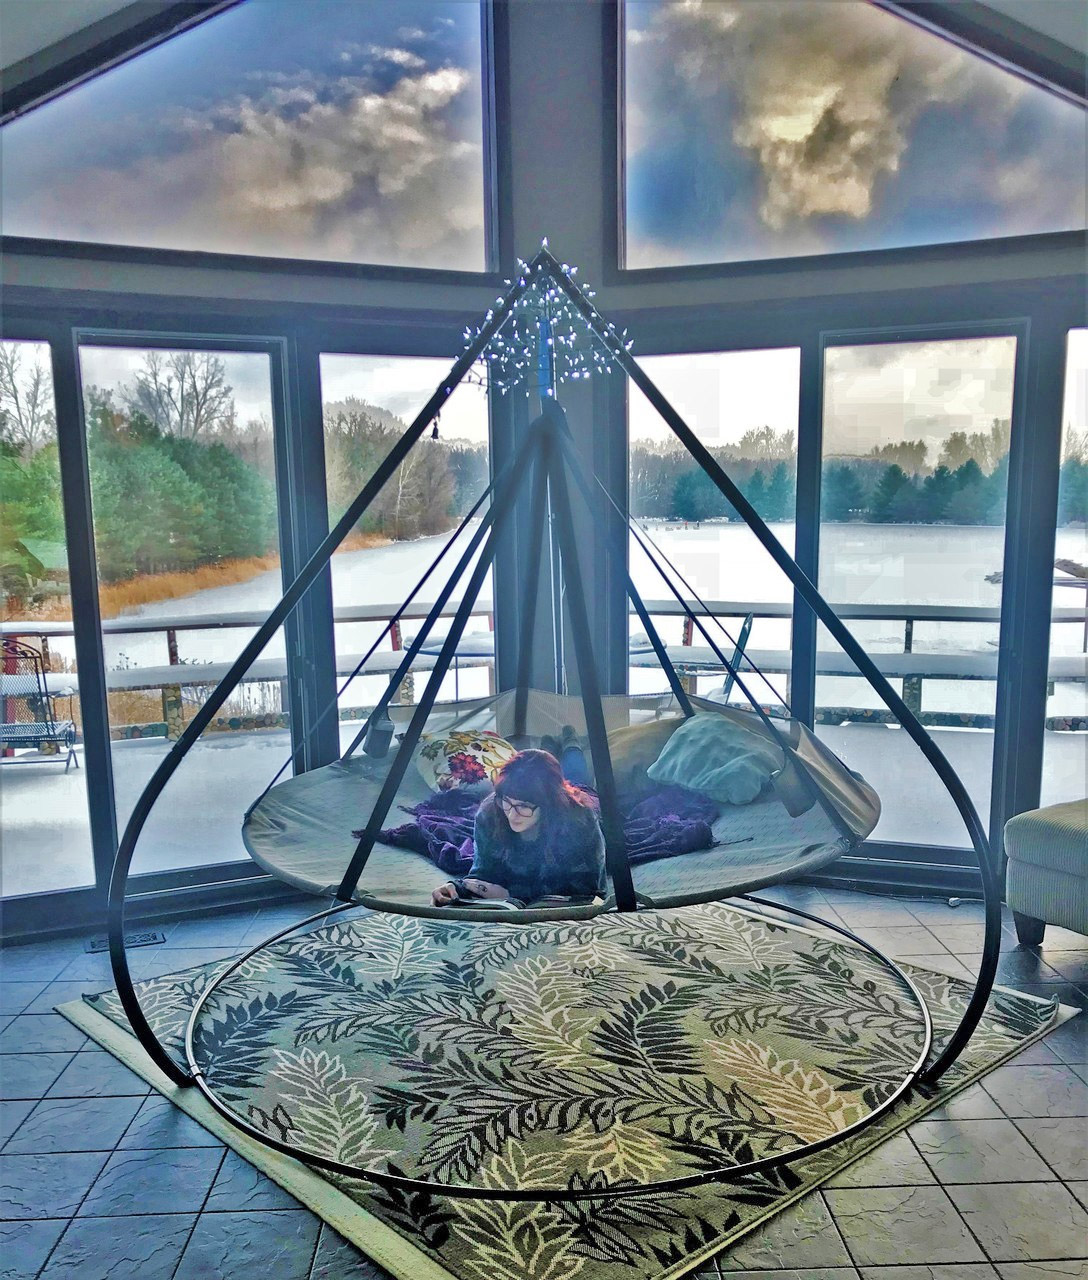 Giant Flying Saucer Hammock Chair With Tripod Stand